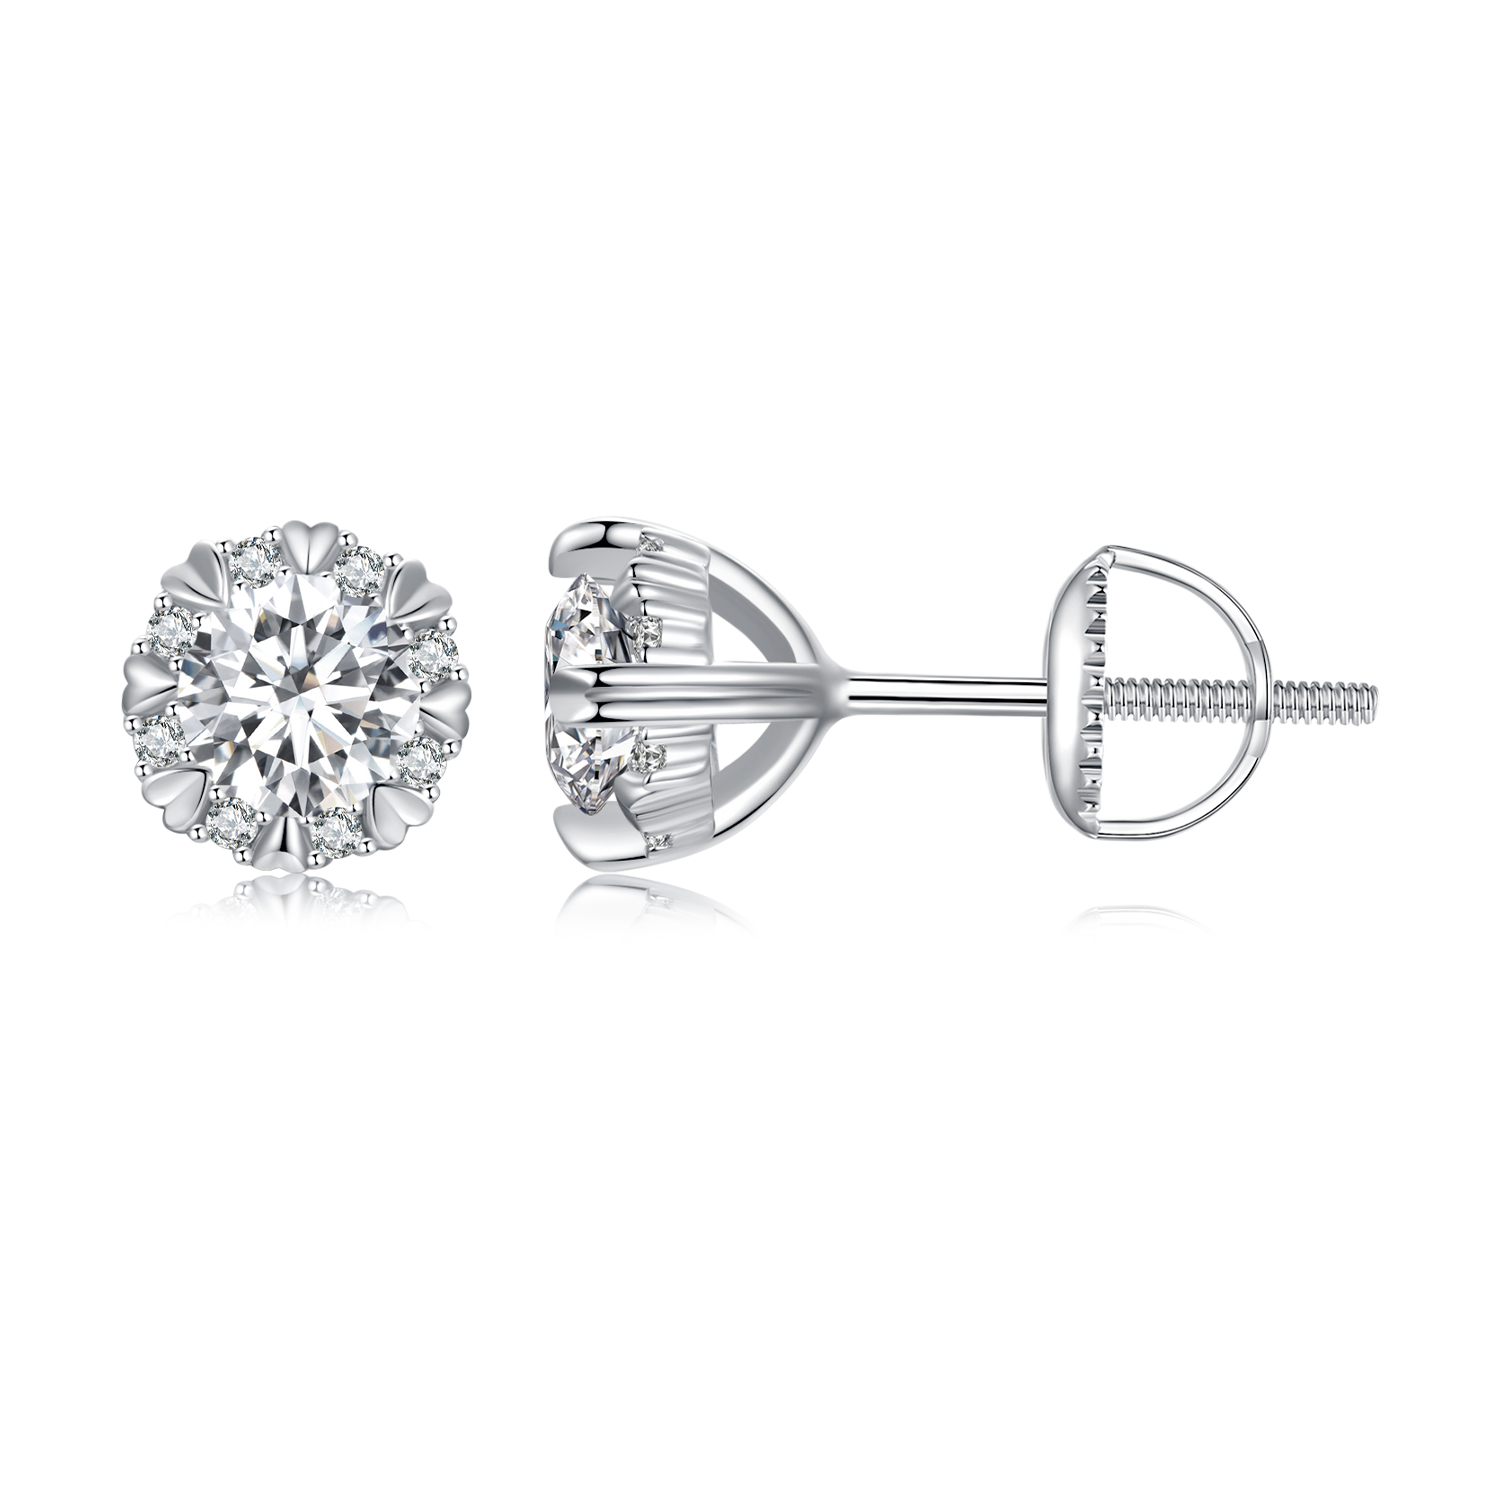 pandora style exquisite moissanite studs earrings with two certificates mse017